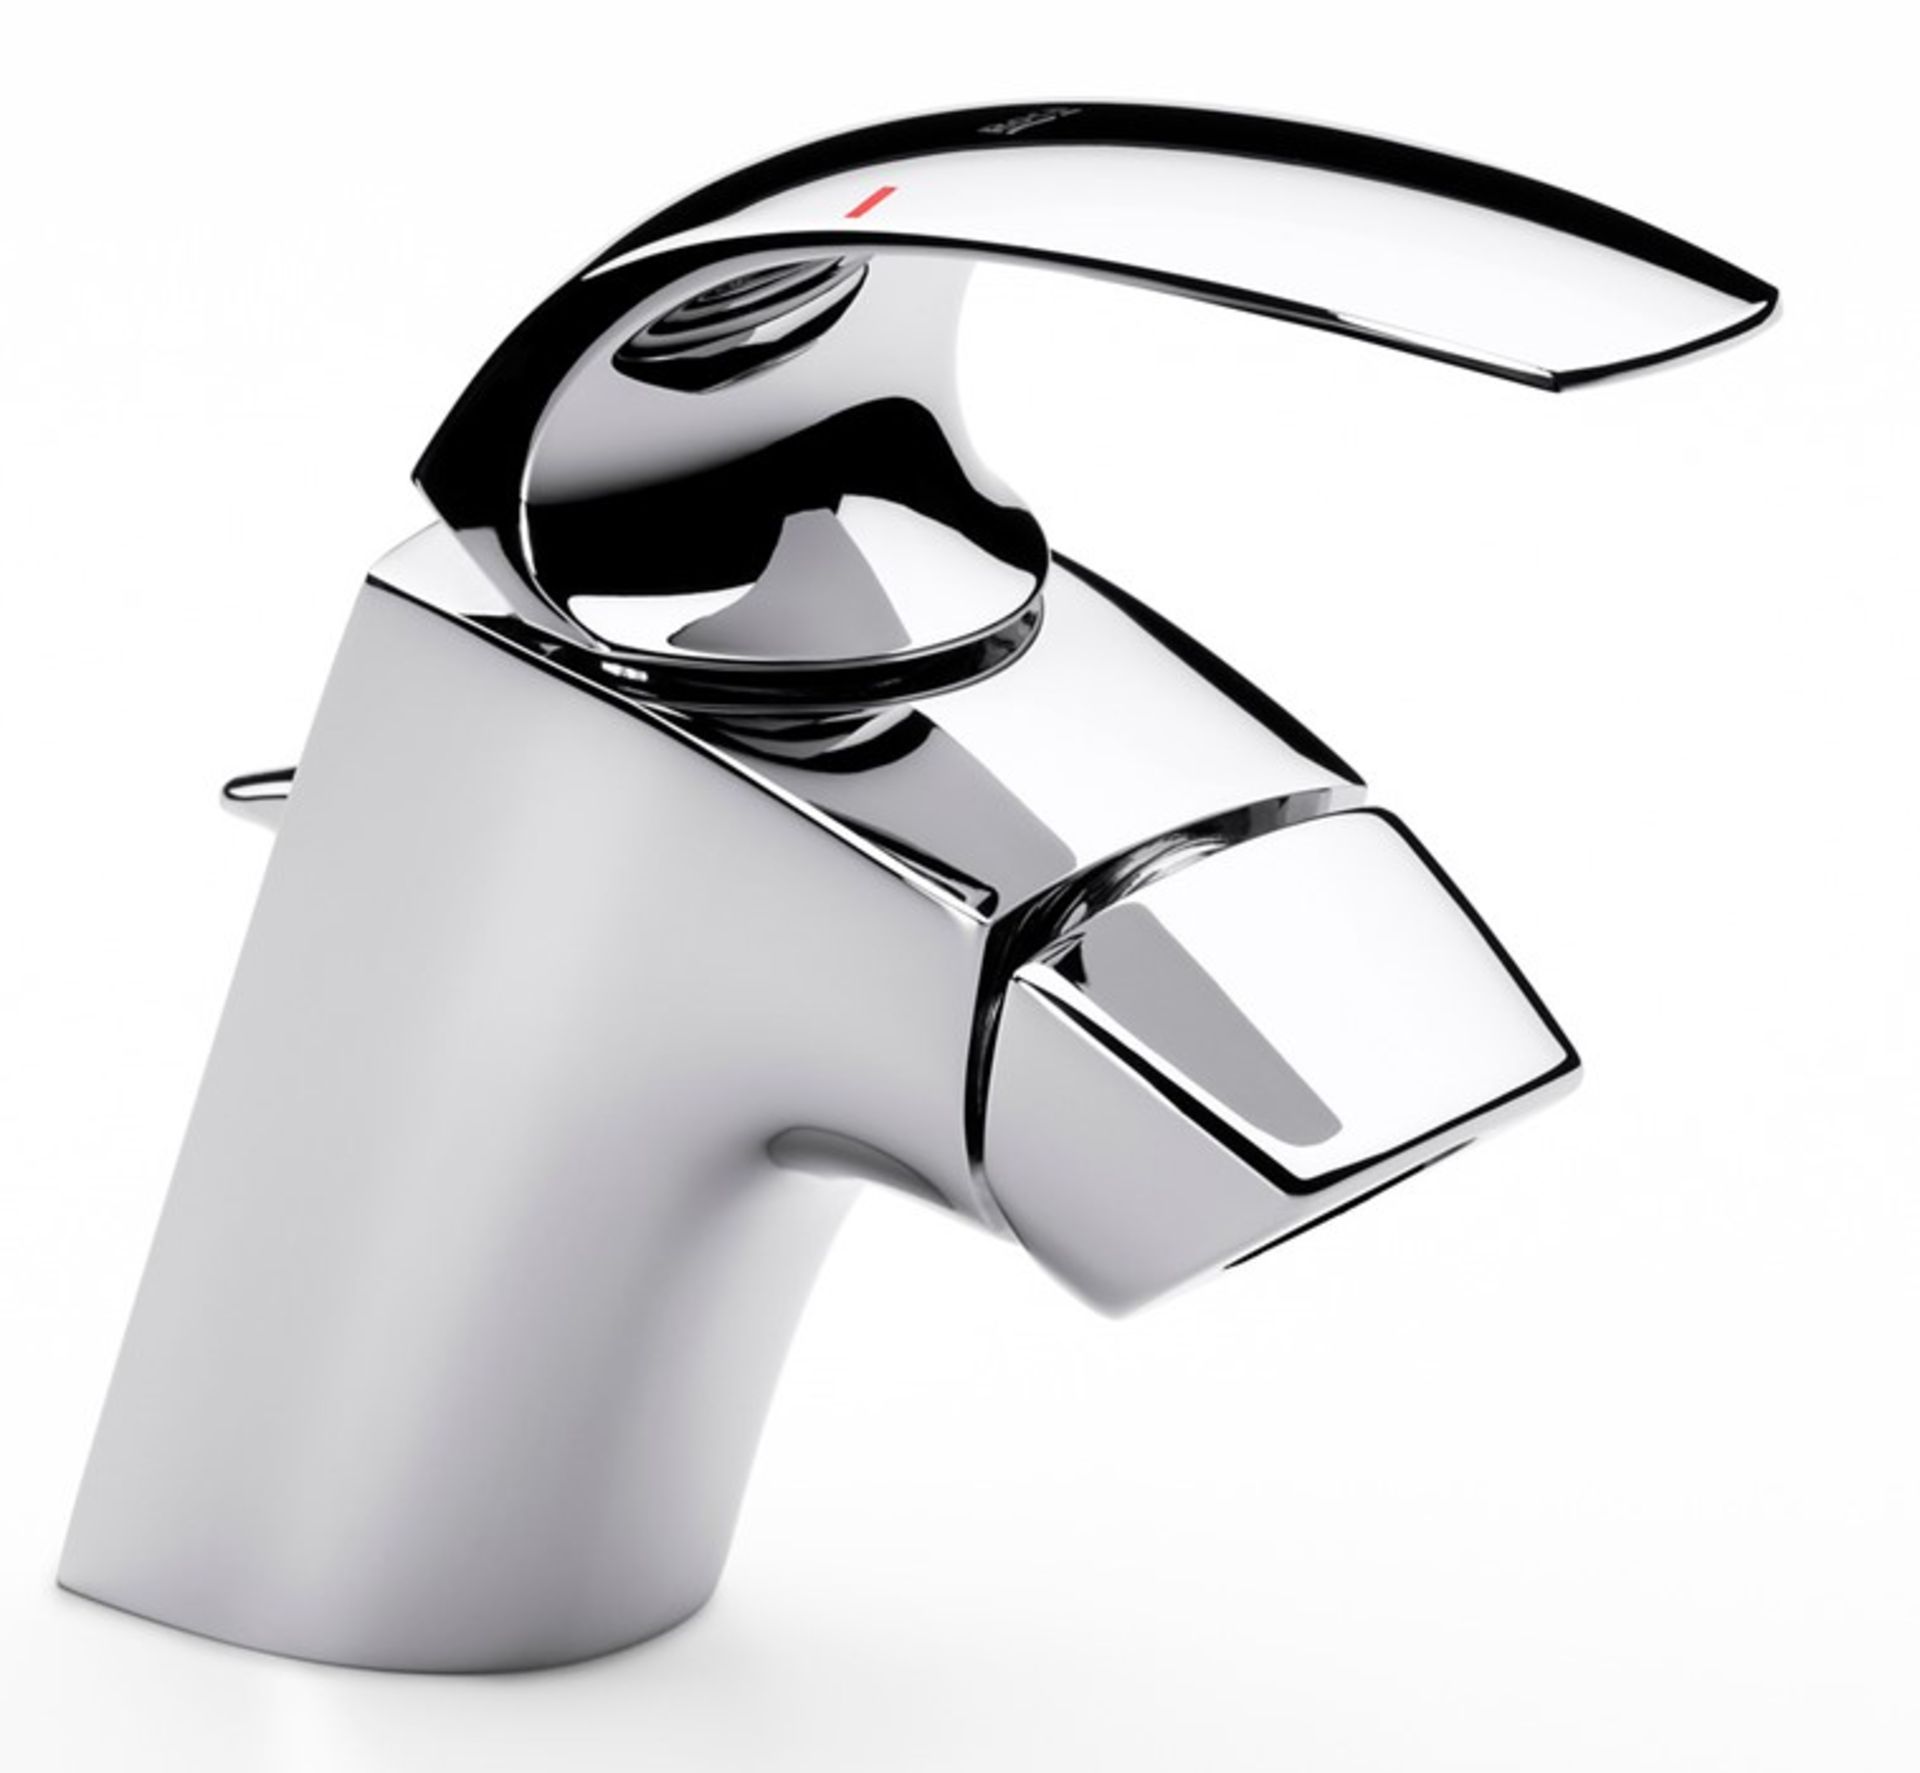 Roca M2-N bidet mixer tap with pop up waste, new and boxed.